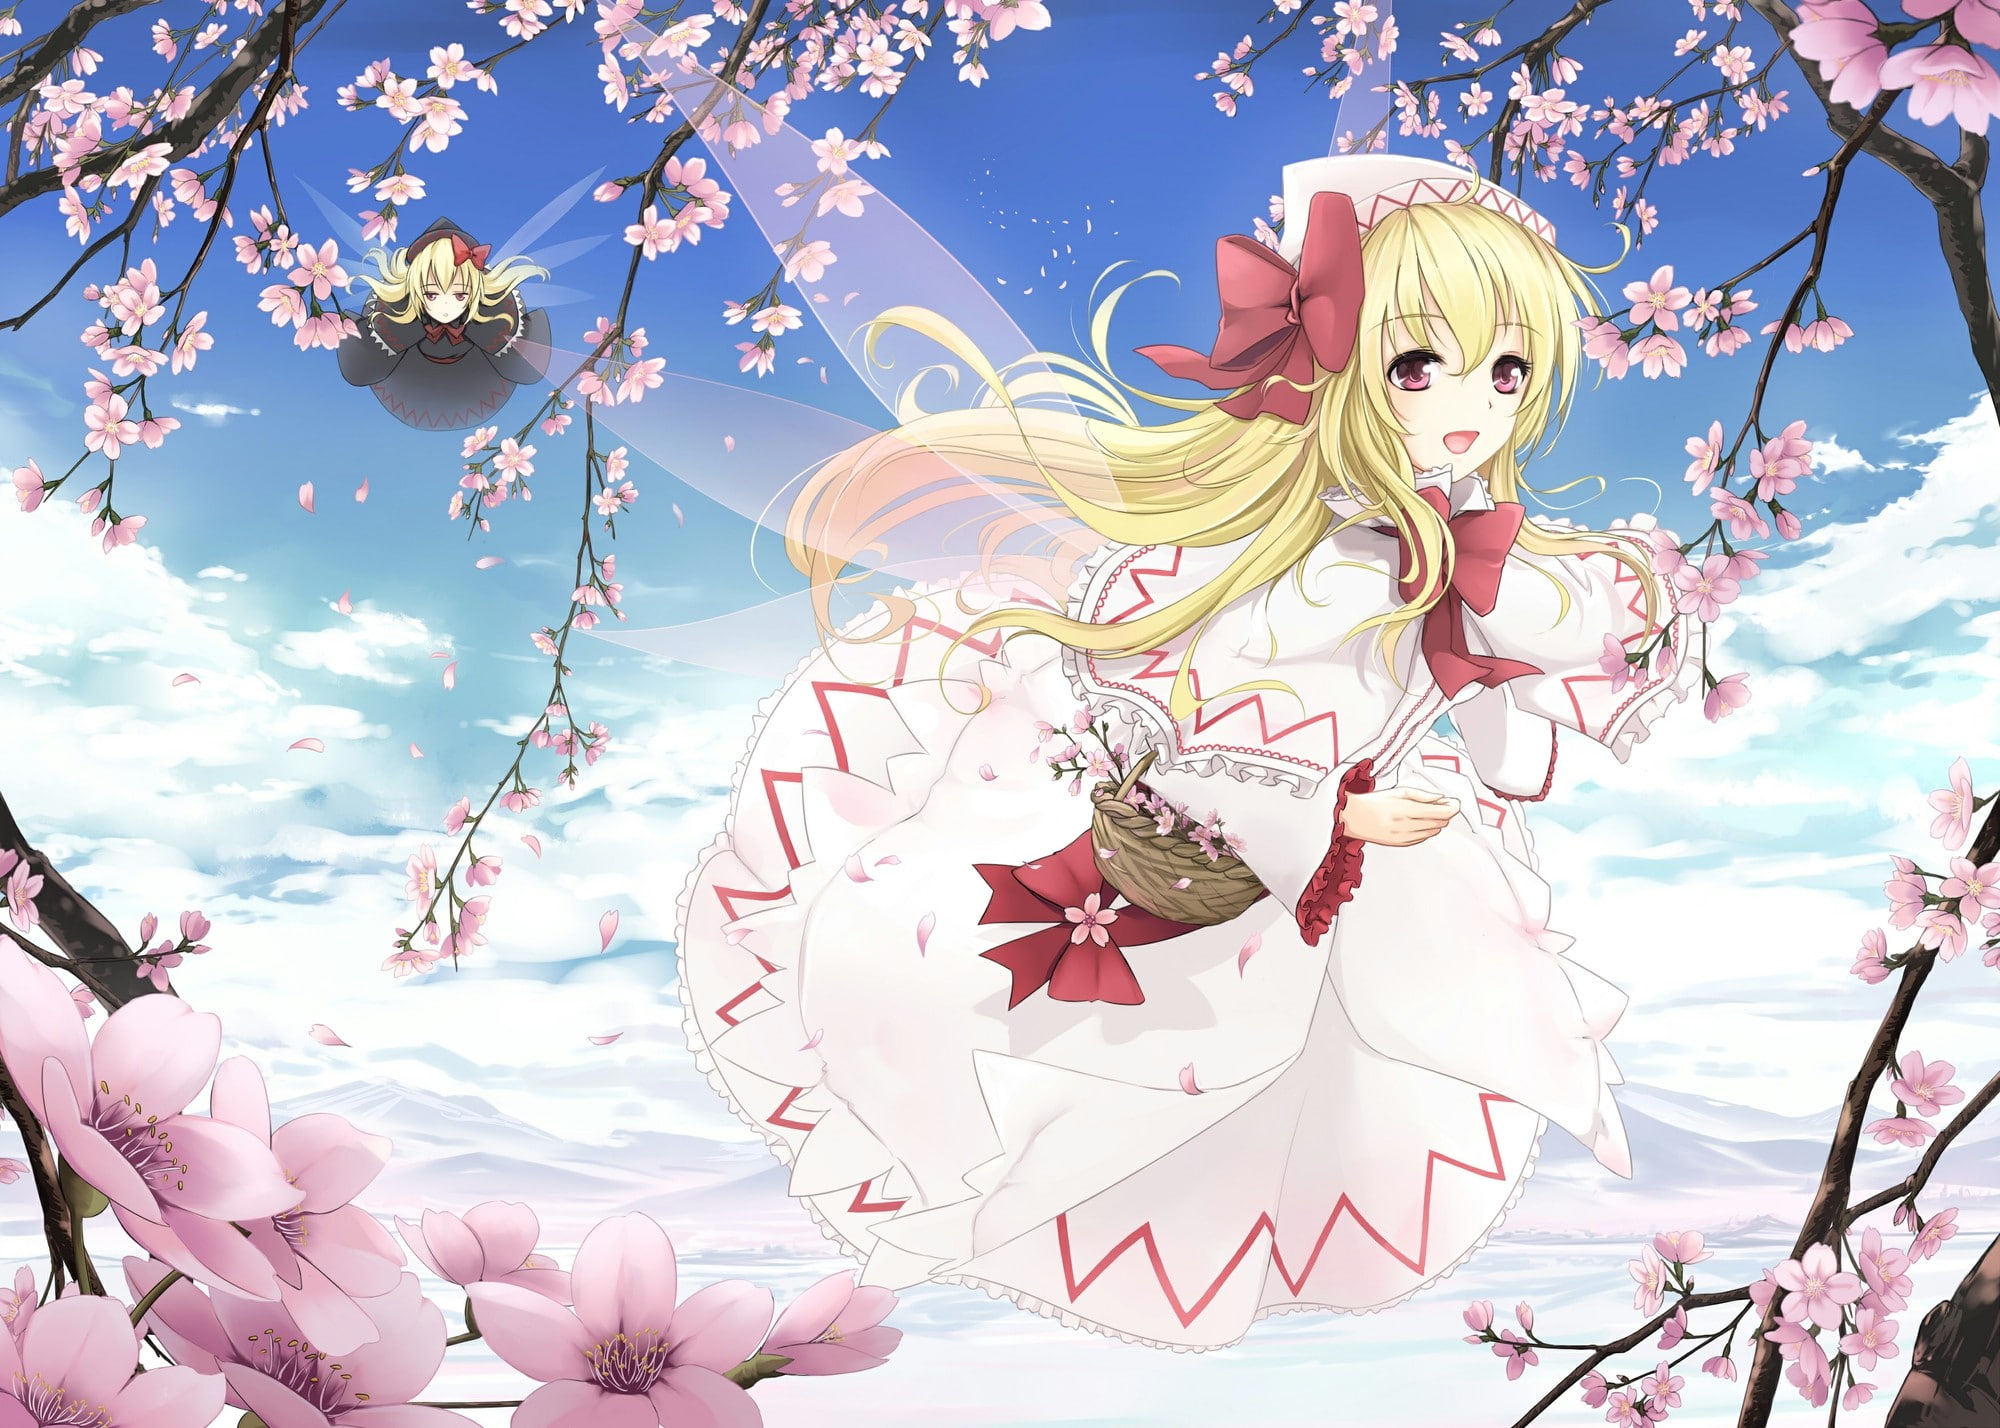 anime, baskets, black, blondes, blossoms, bows, branches, cherry